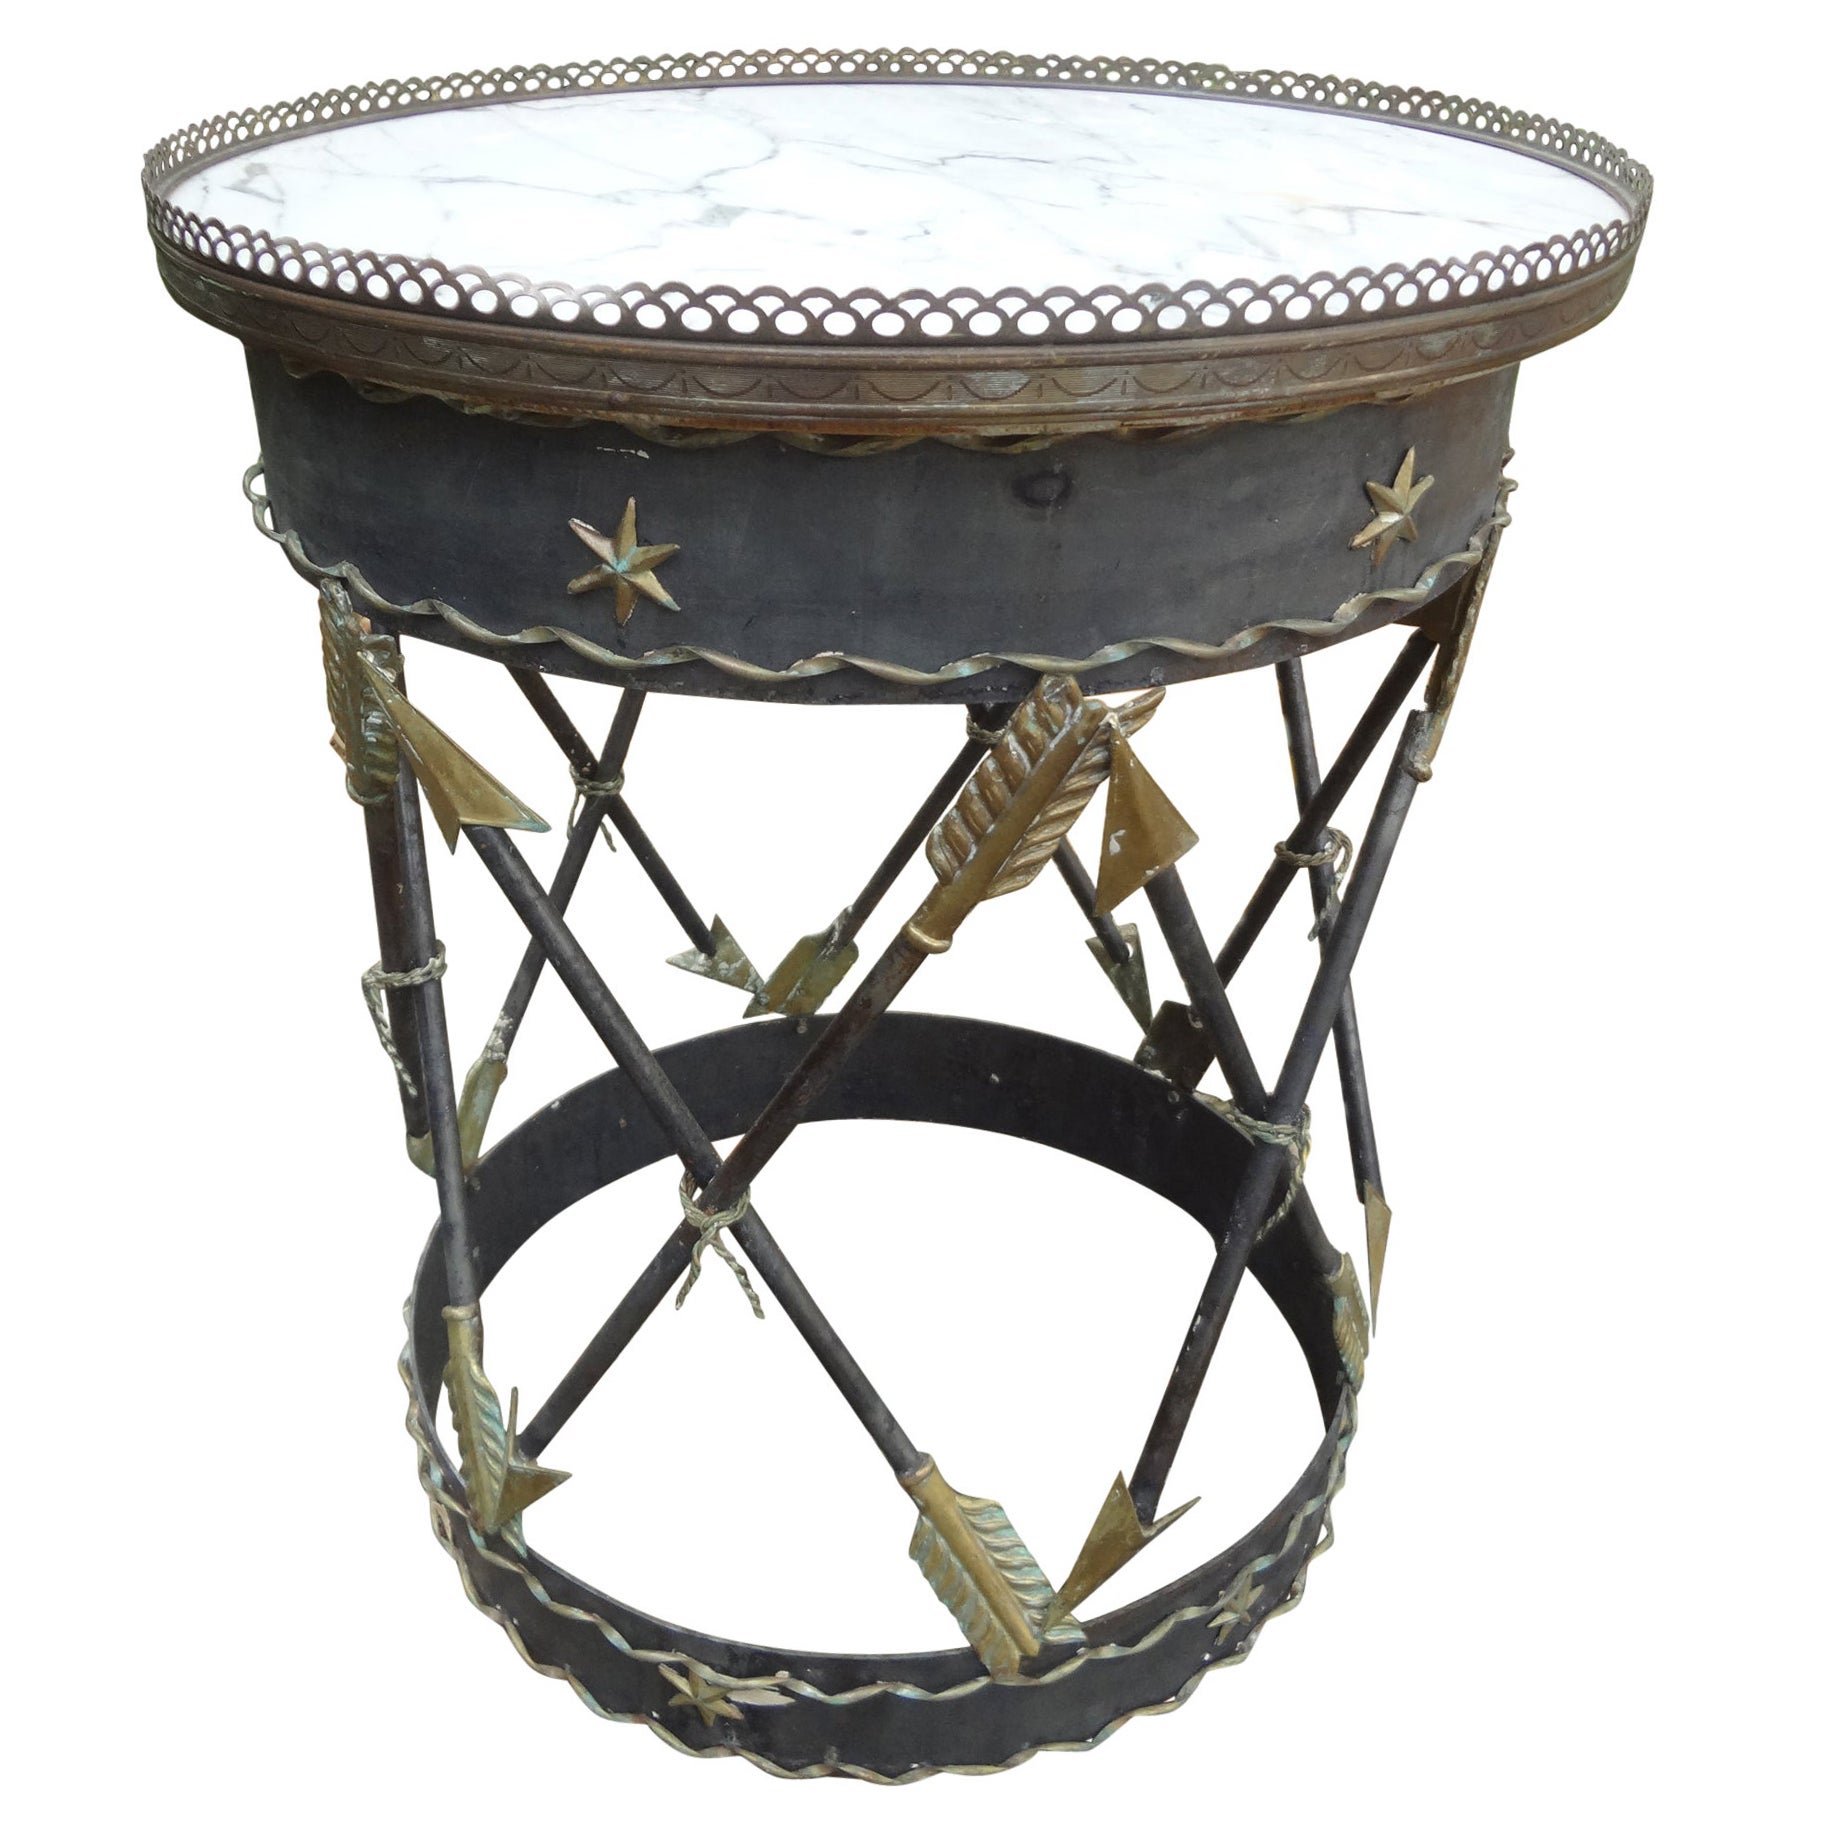 Italian Neoclassical Style Iron and Tole Table with Arrows